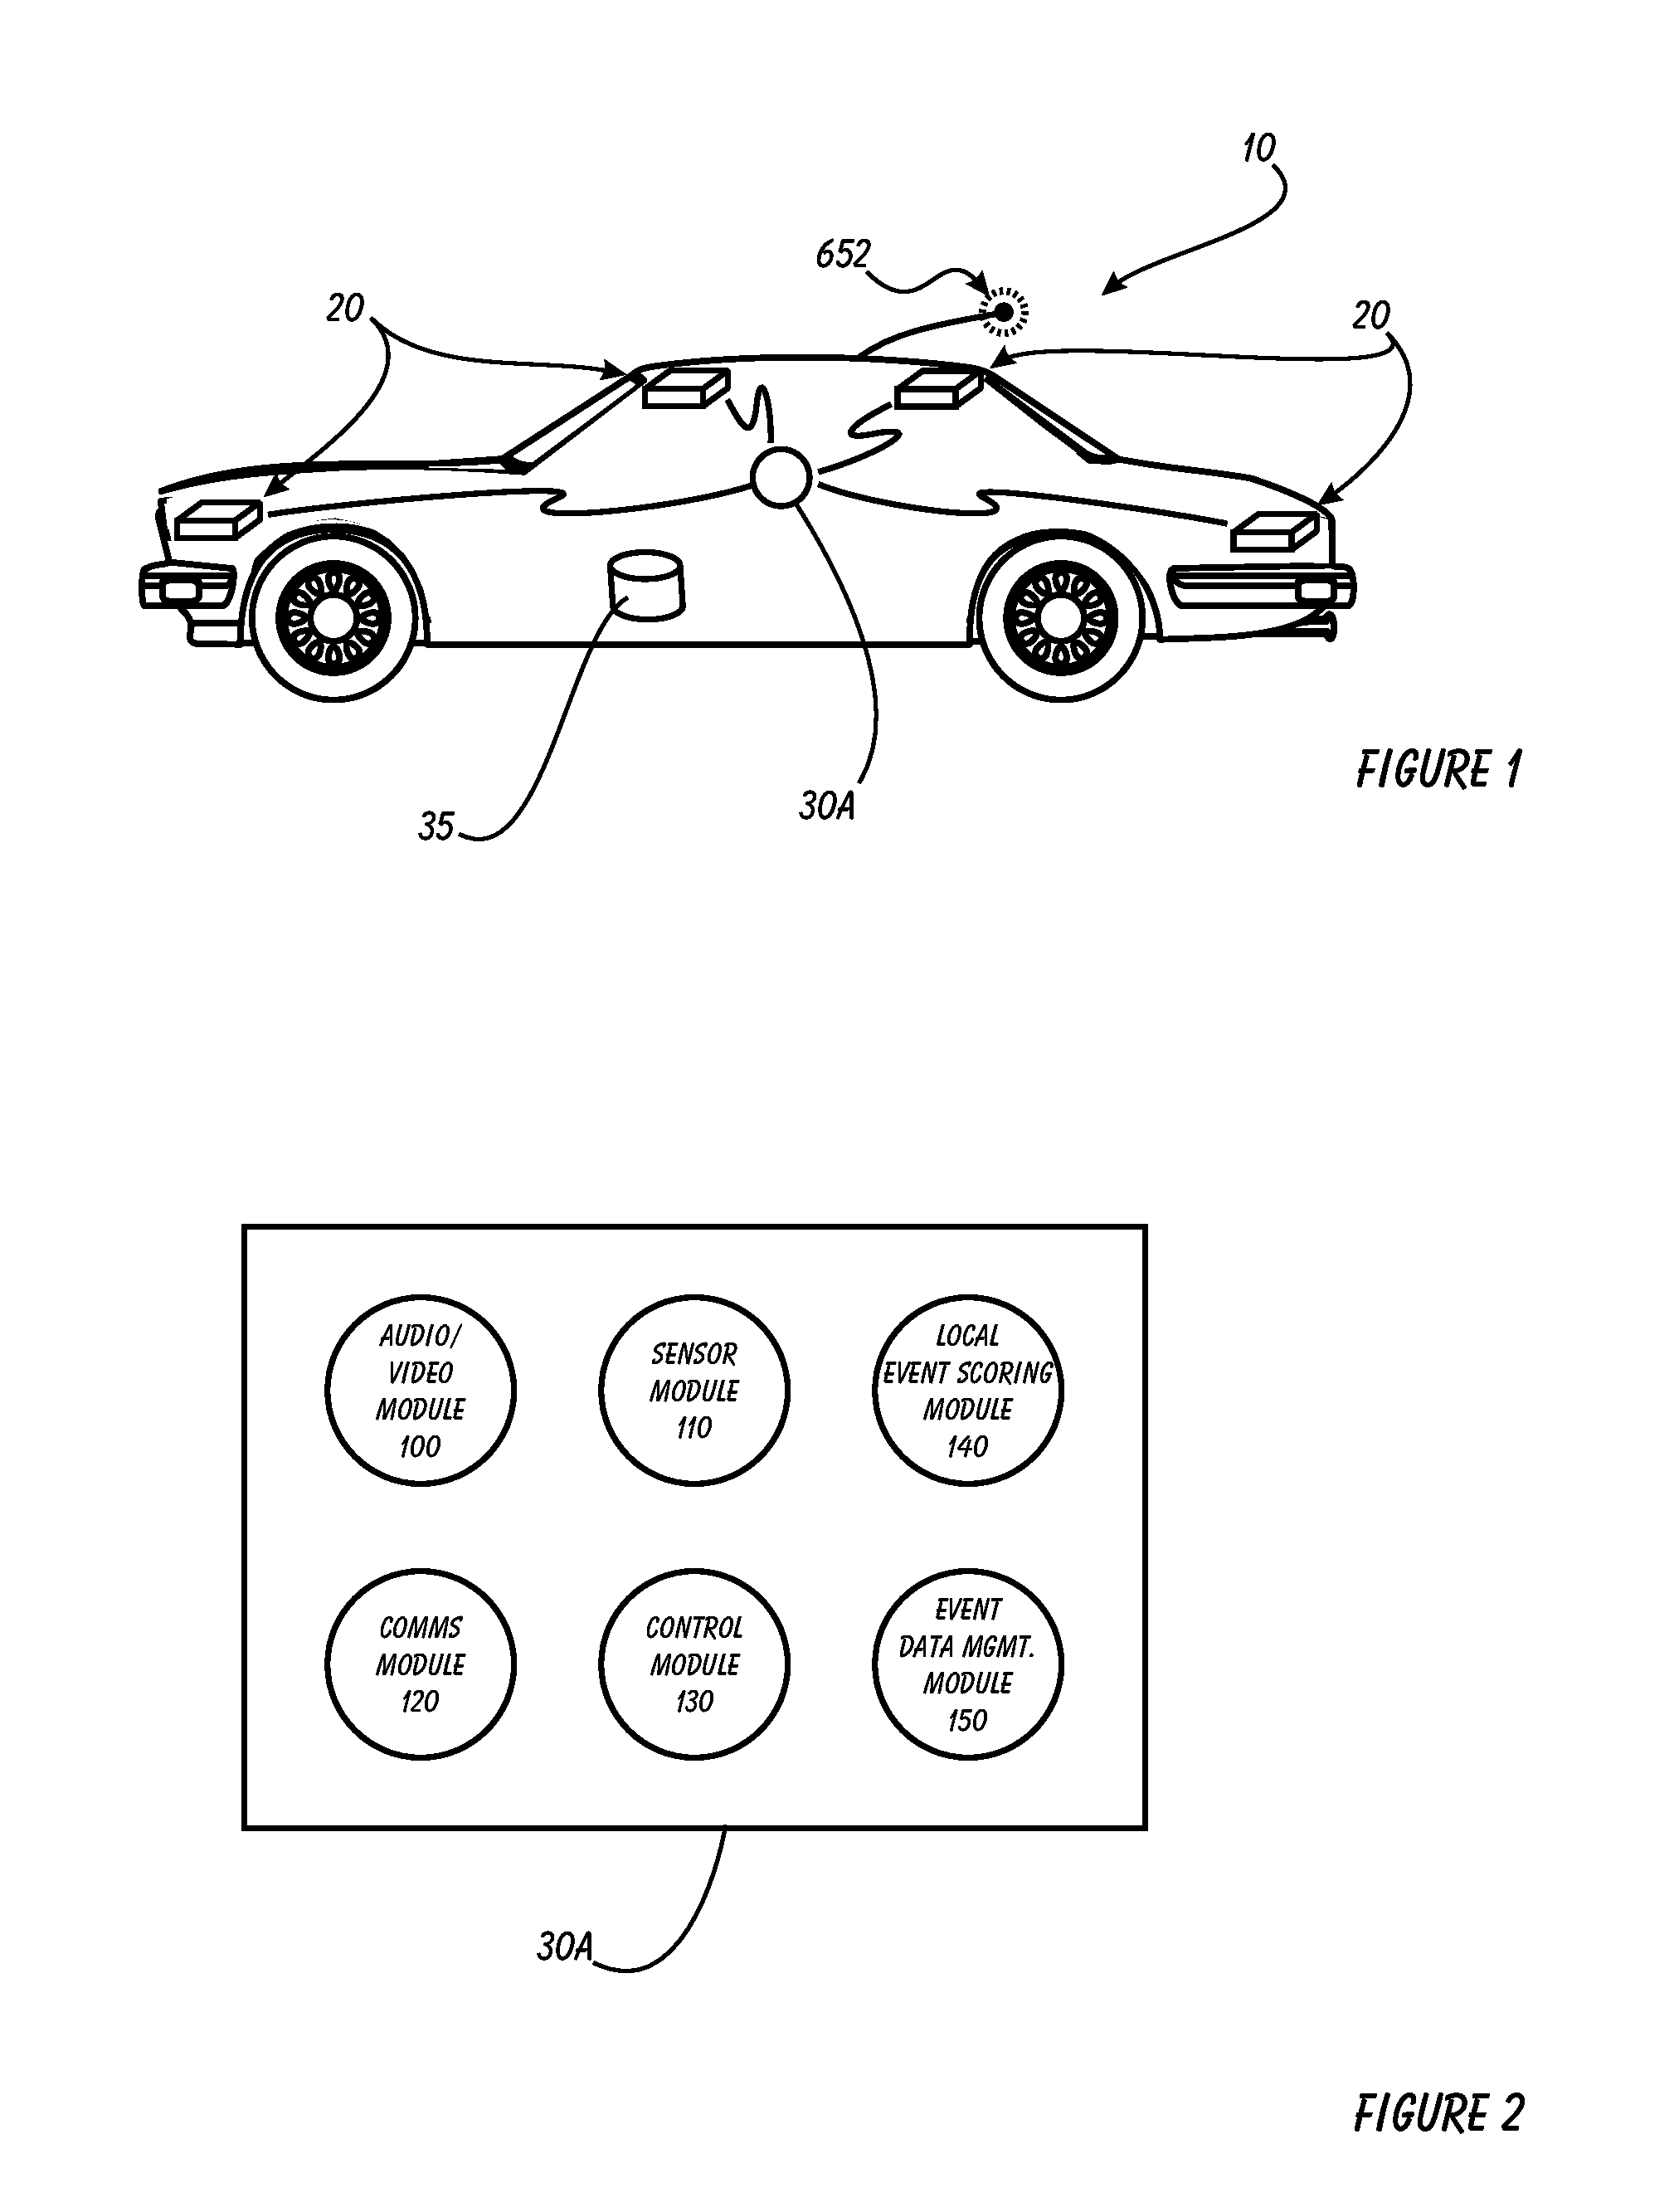 Driver Risk Assessment System and Method Having Calibrating Automatic Event Scoring